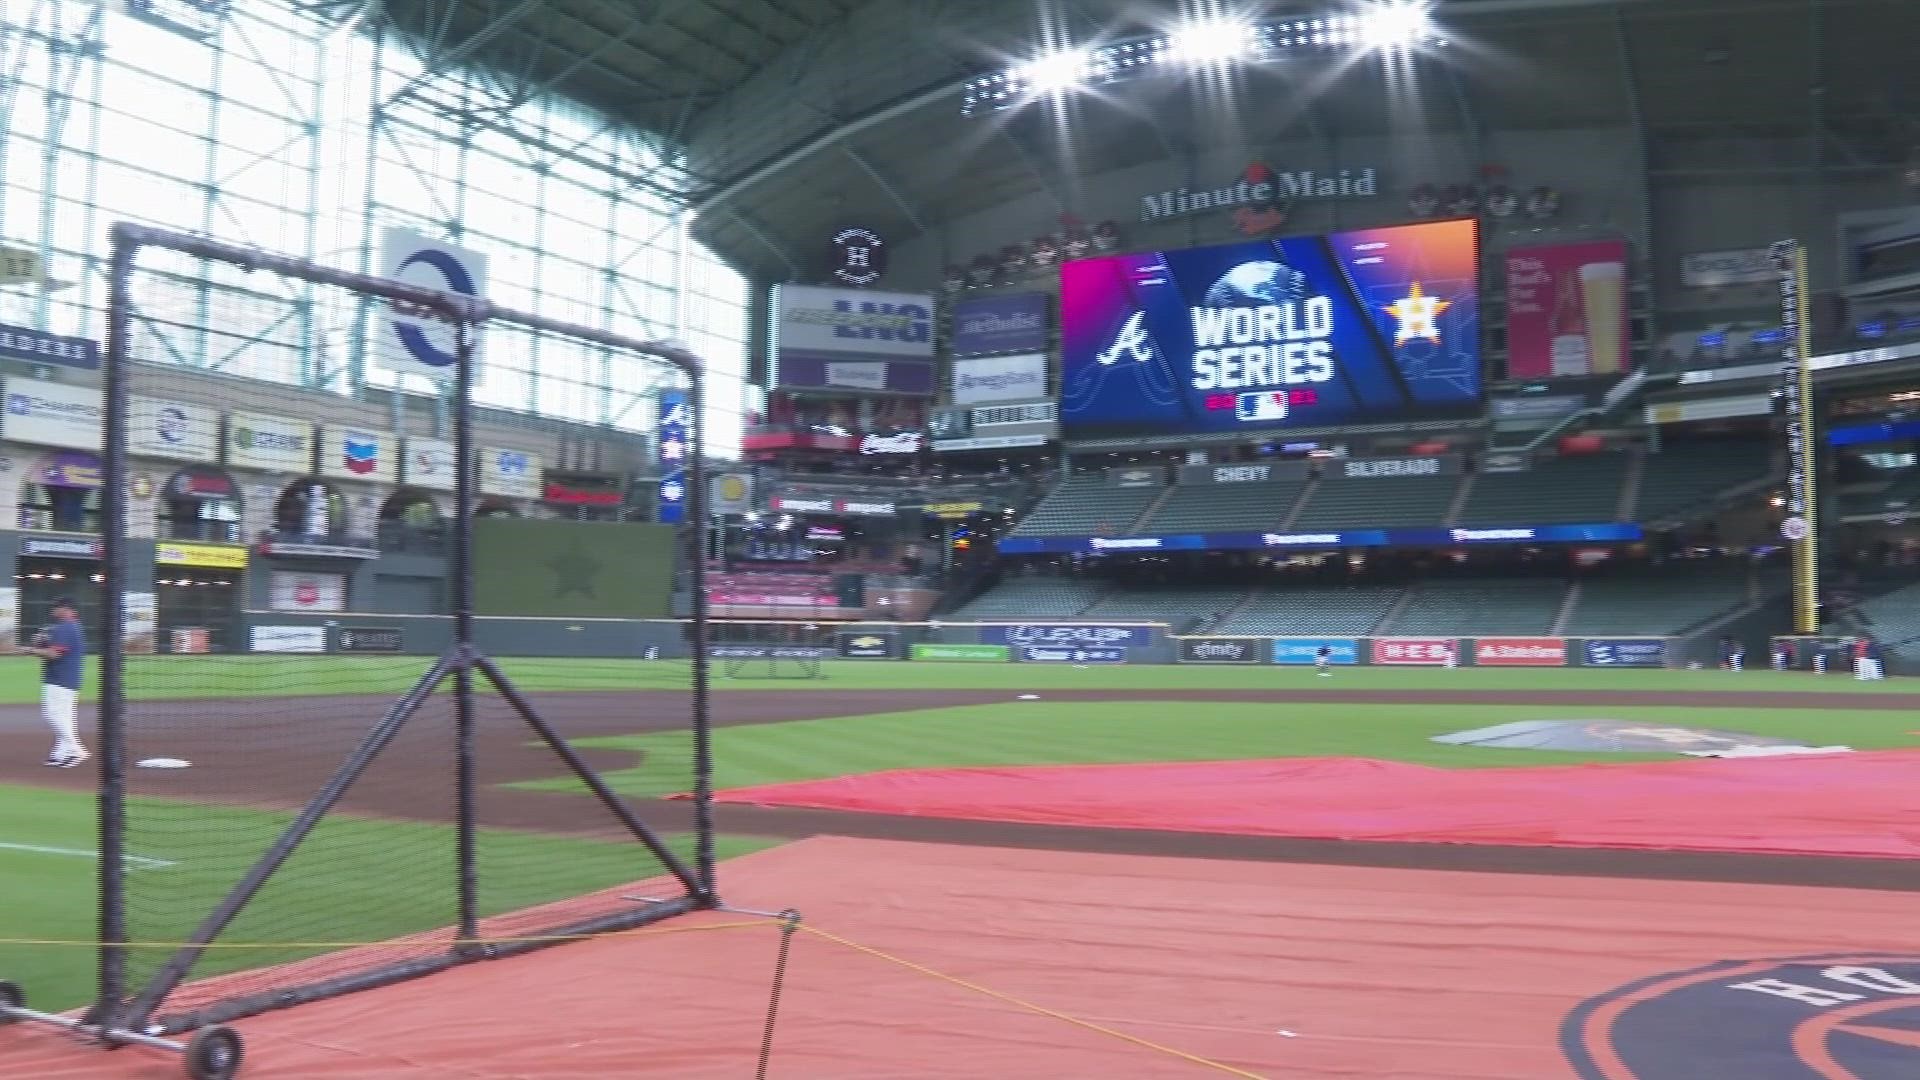 Also known as "The Juice Box," it's the perfect stage and talking point for the first two games of the World Series.